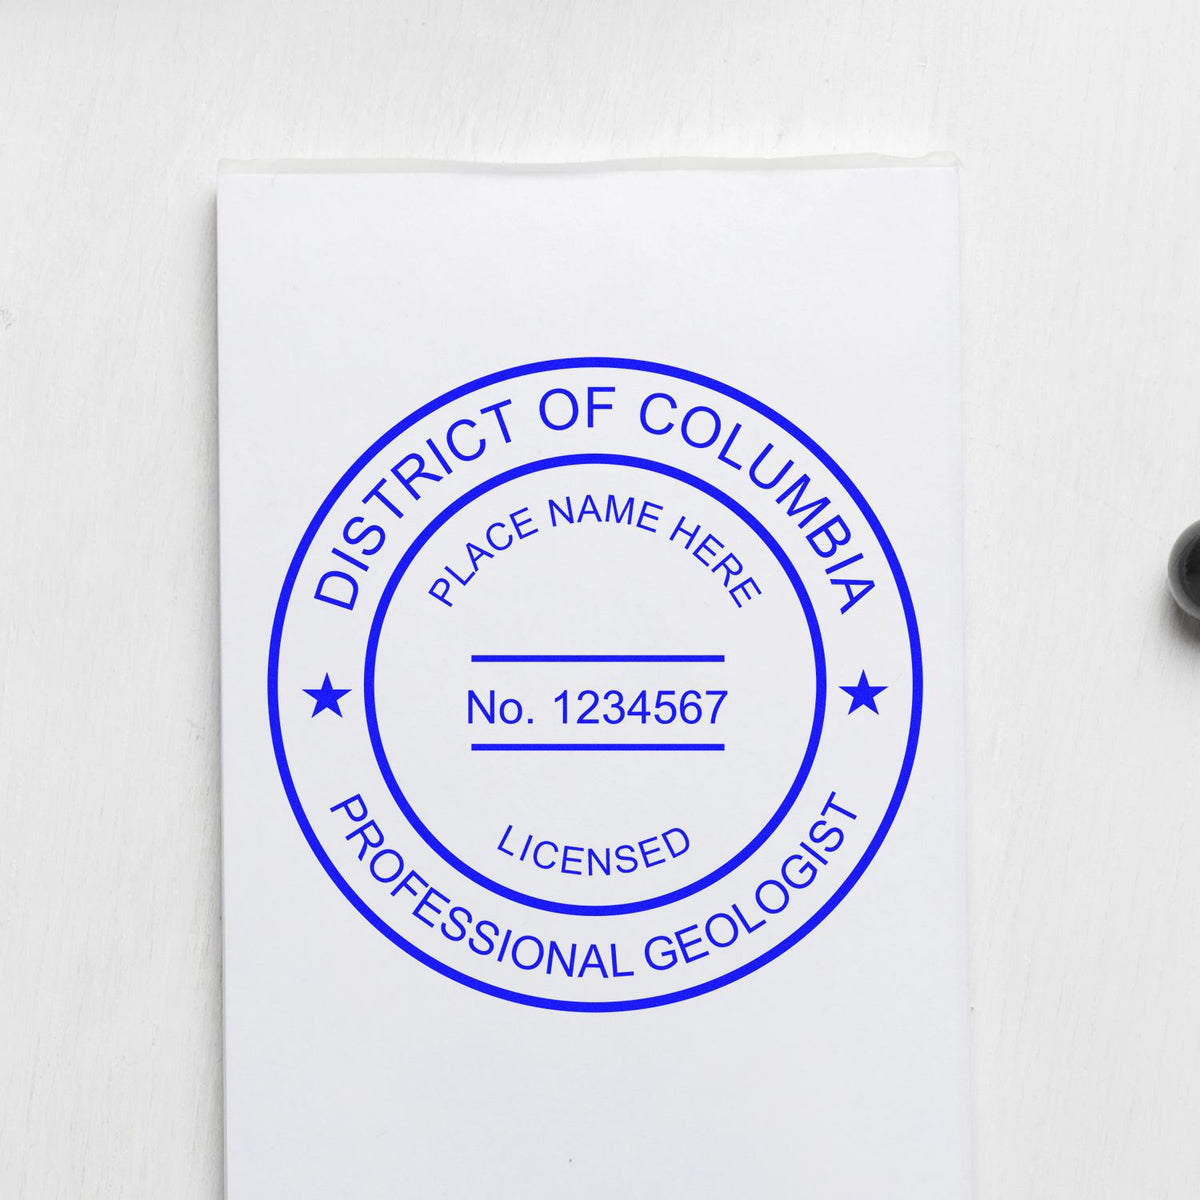 An alternative view of the Slim Pre-Inked District of Columbia Professional Geologist Seal Stamp stamped on a sheet of paper showing the image in use